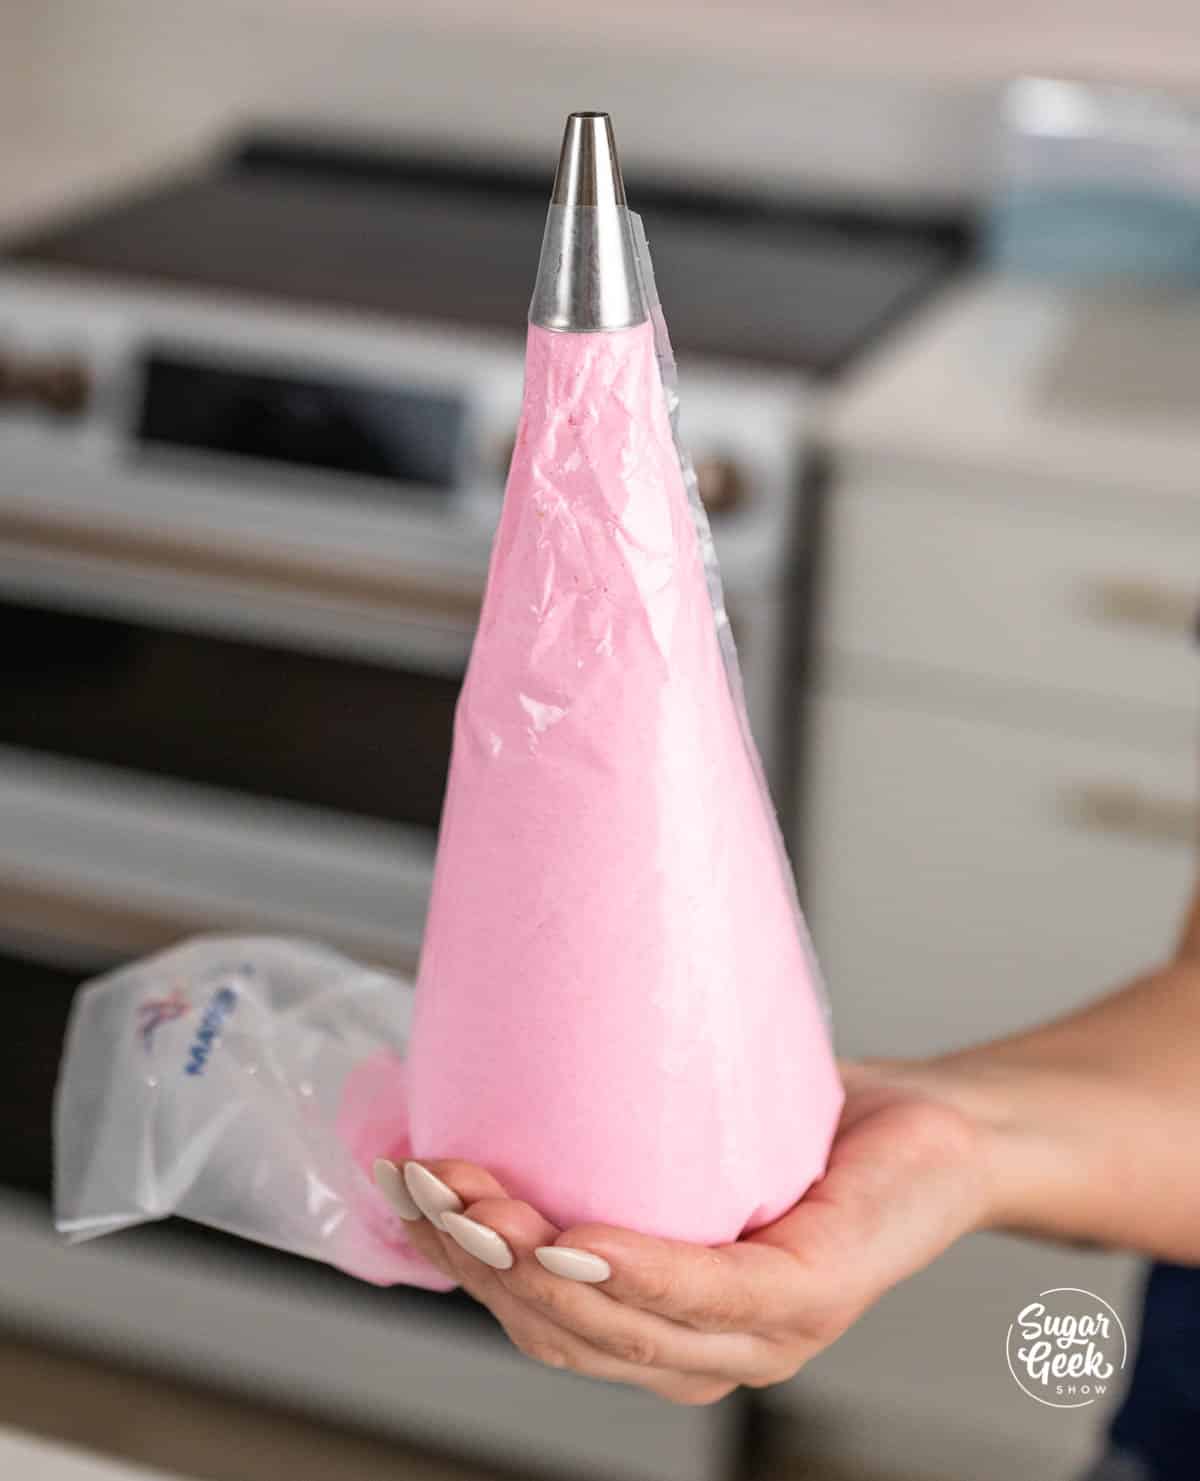 macaron batter in a piping bag